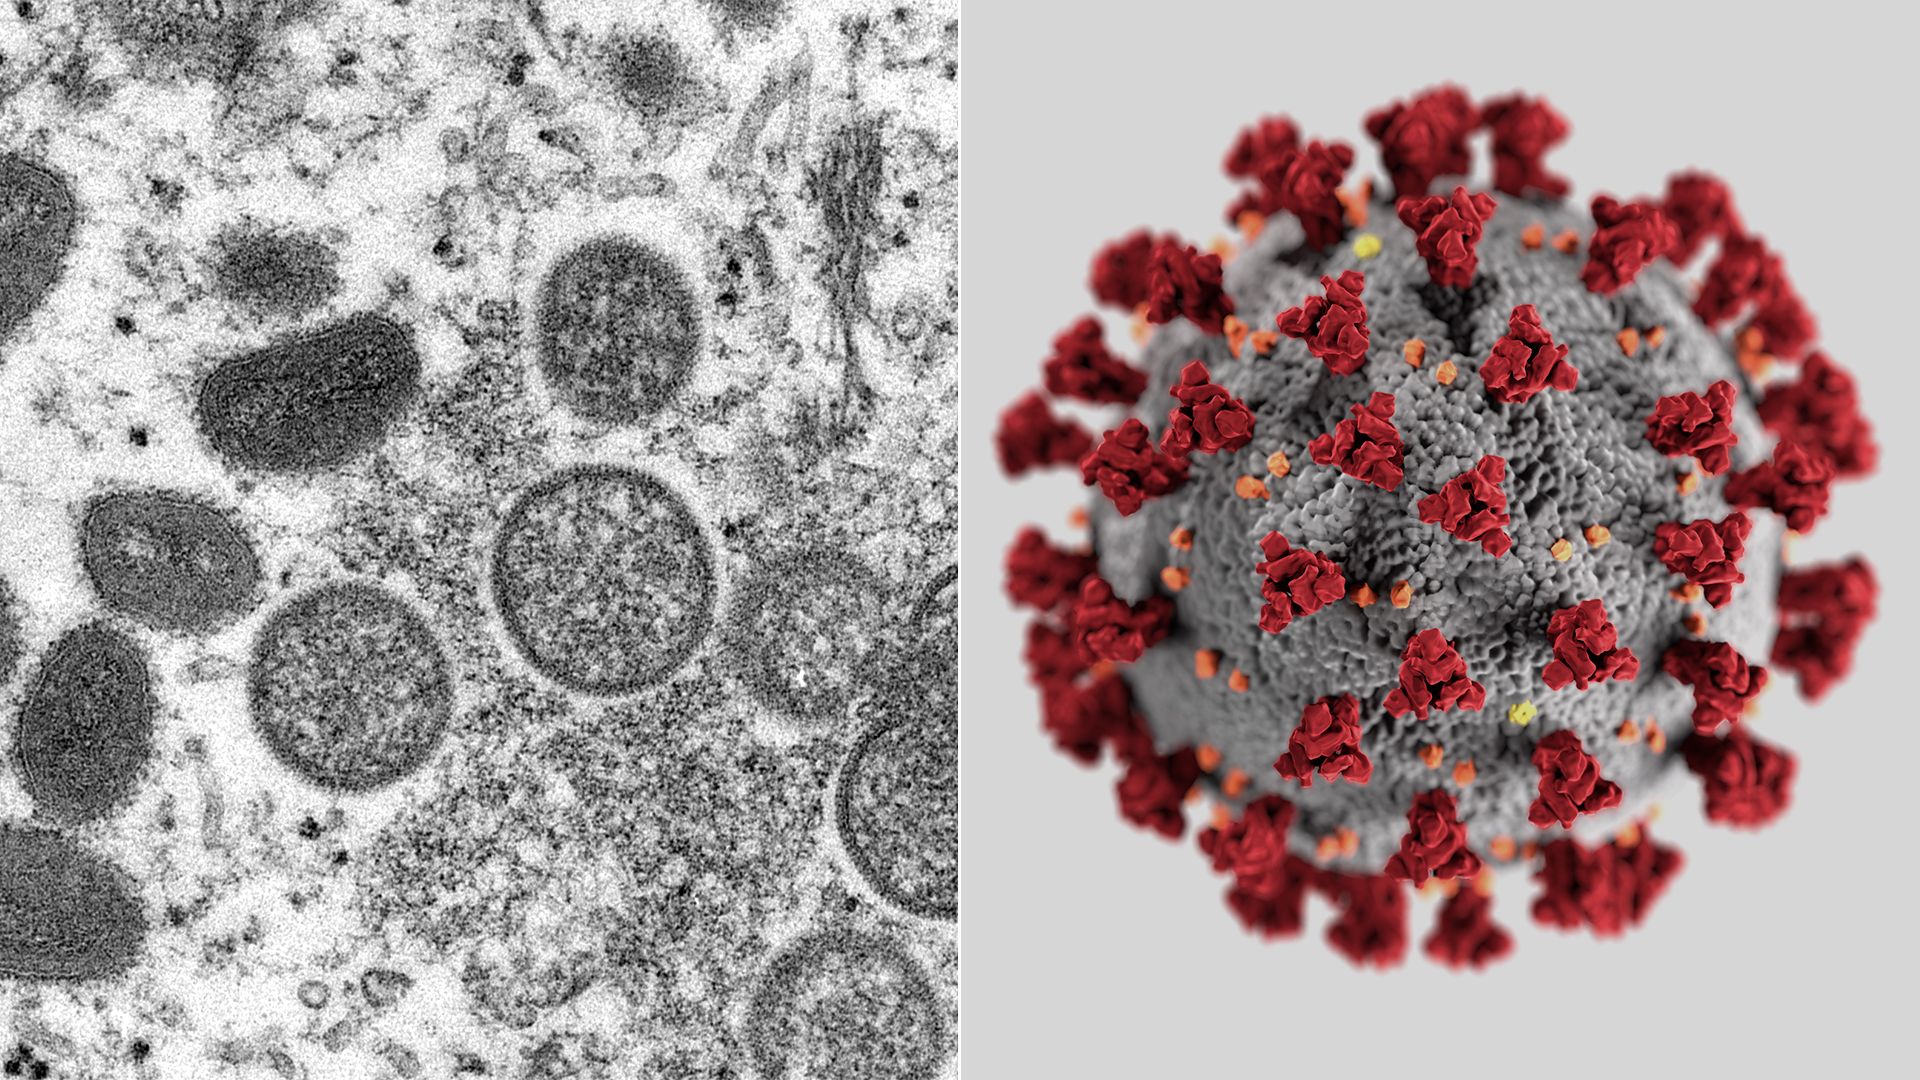 Collage of a photo of the monkeypox virus on the left side and SARS-CoV-2 on the right side.